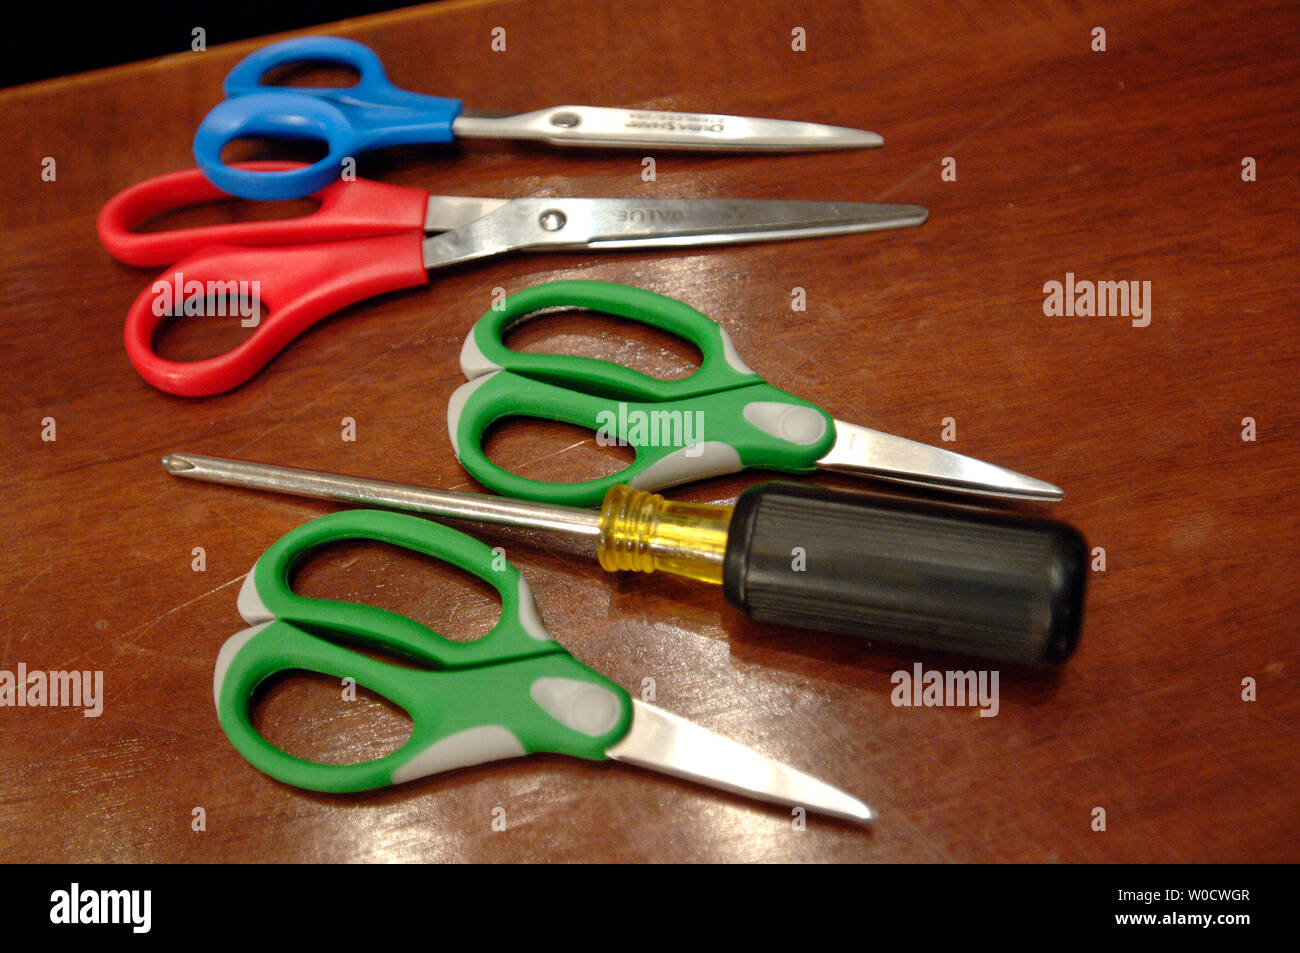 Sets of scissors and a screw driver sit on a table at a Senate